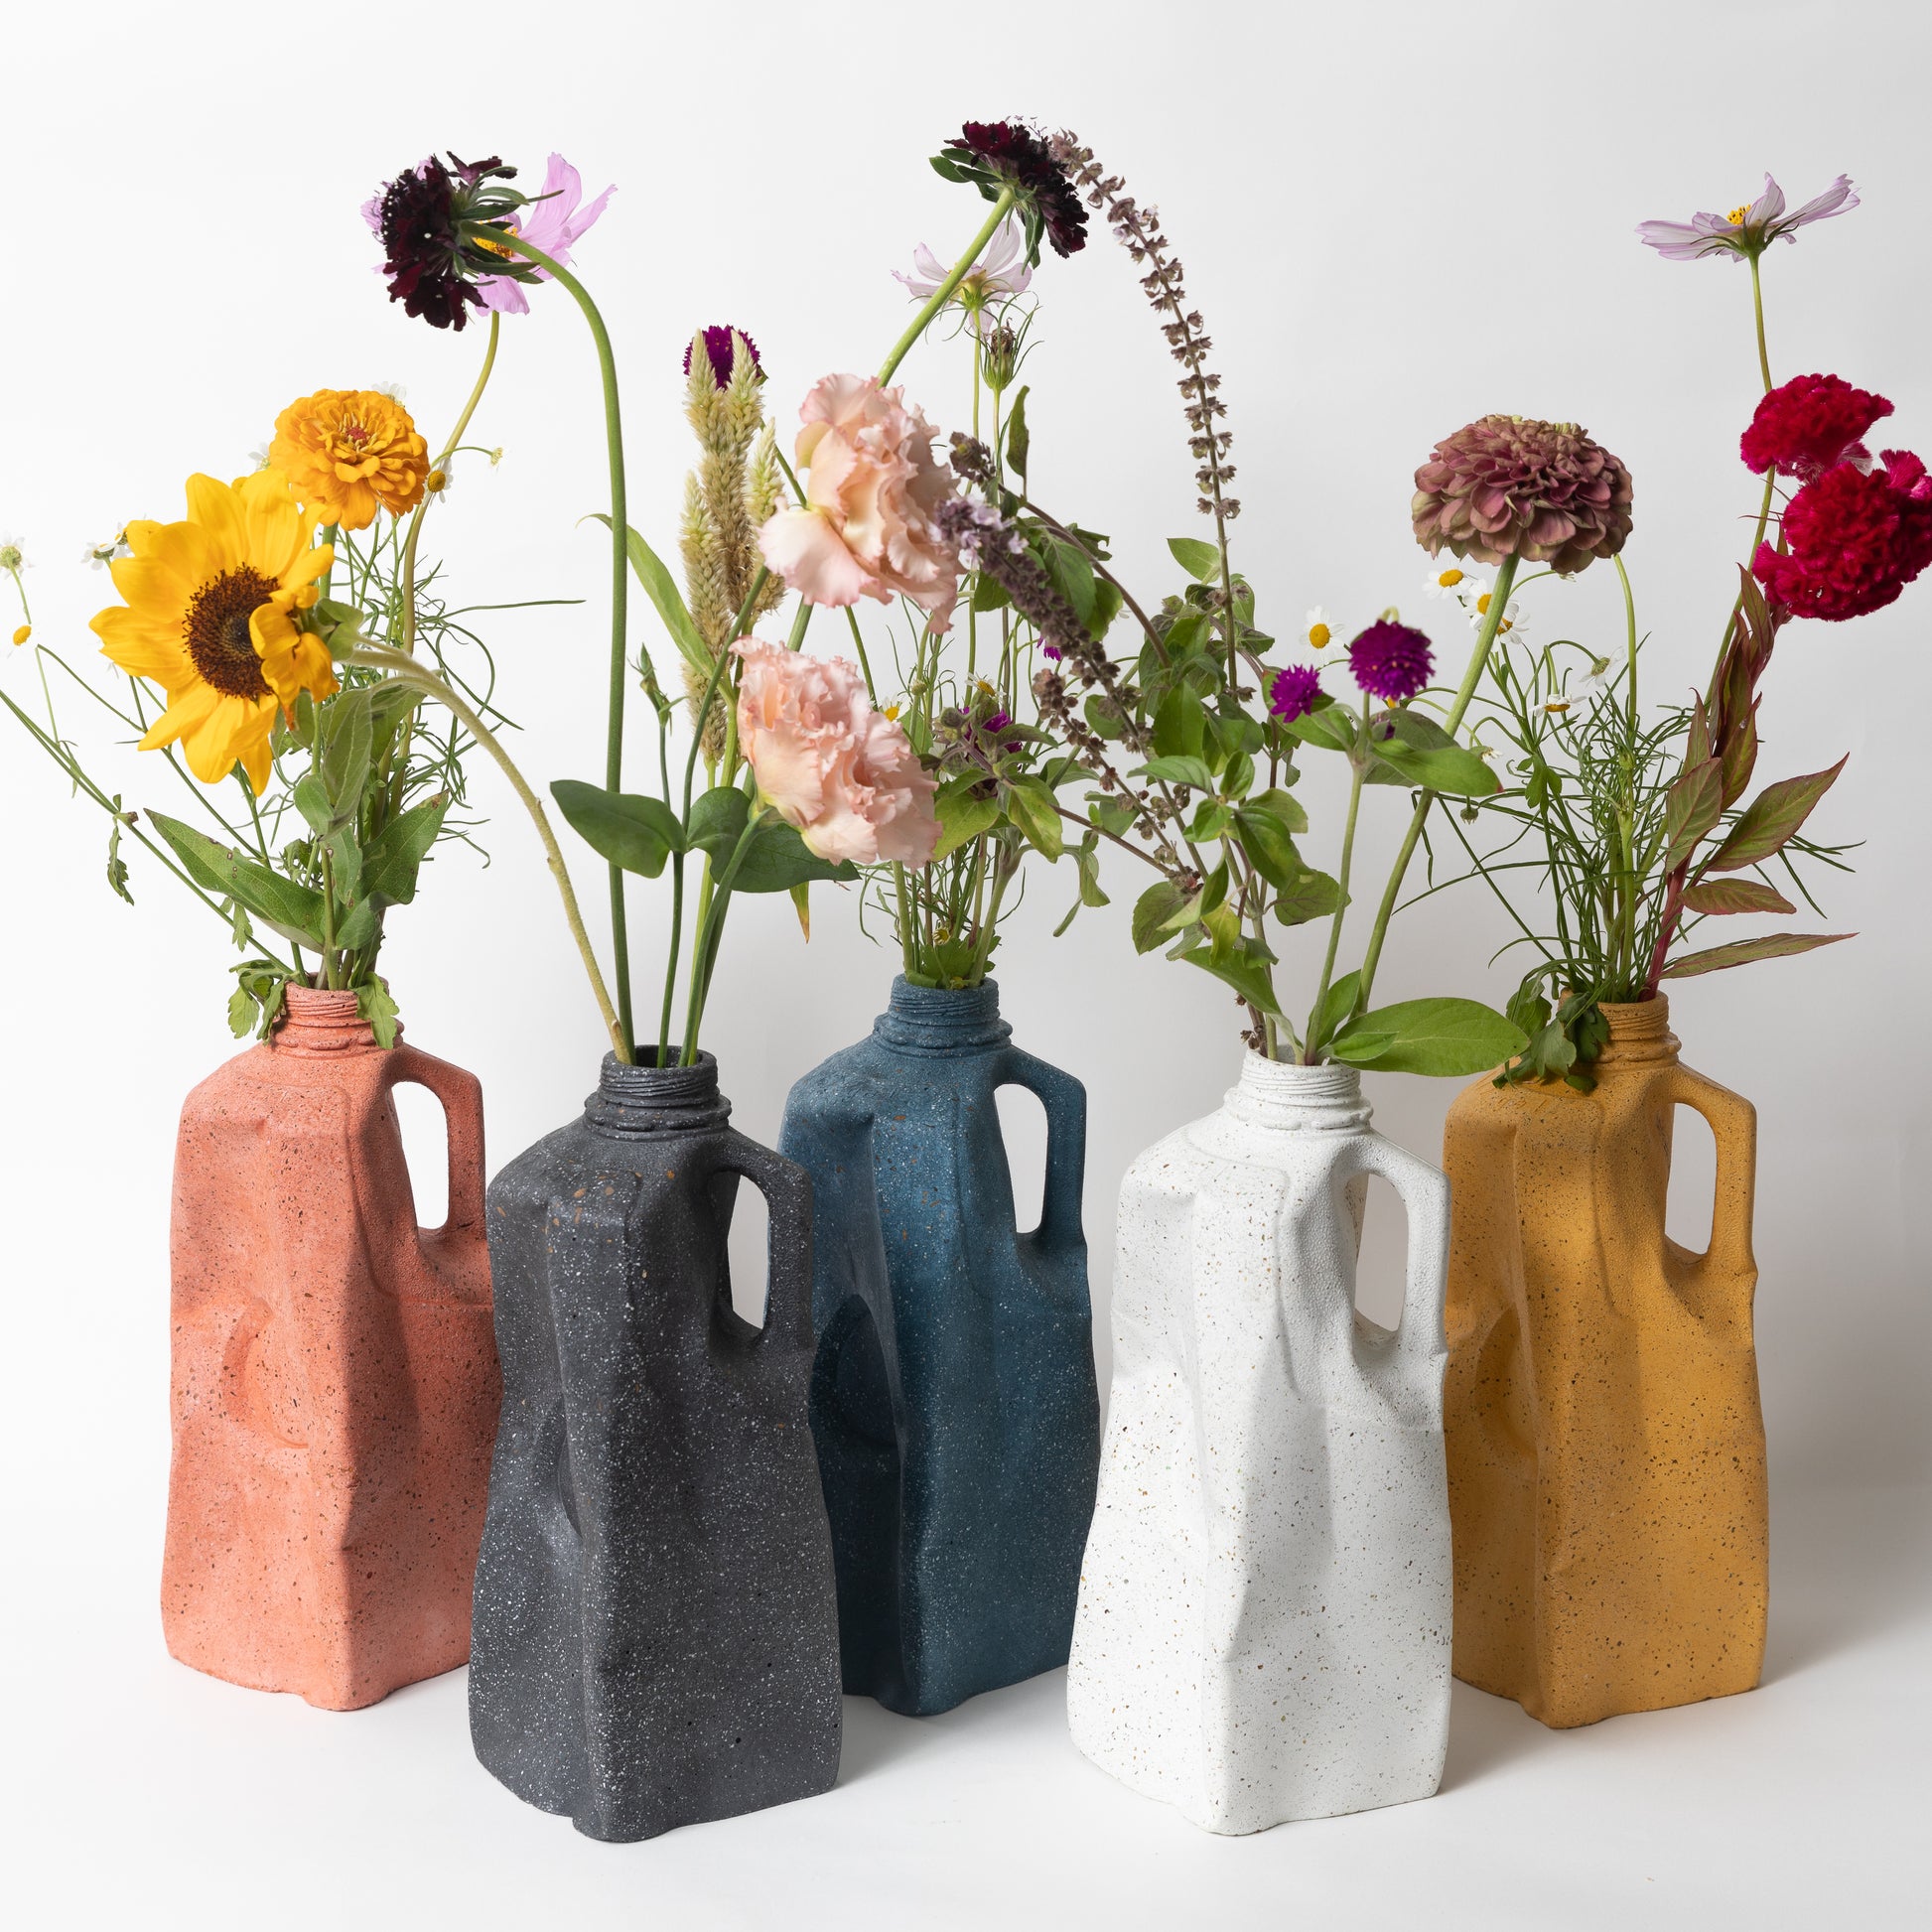 The Milk Carton Vases from our Garbage Collection, showing our terrazzo color options & styled with flowers.